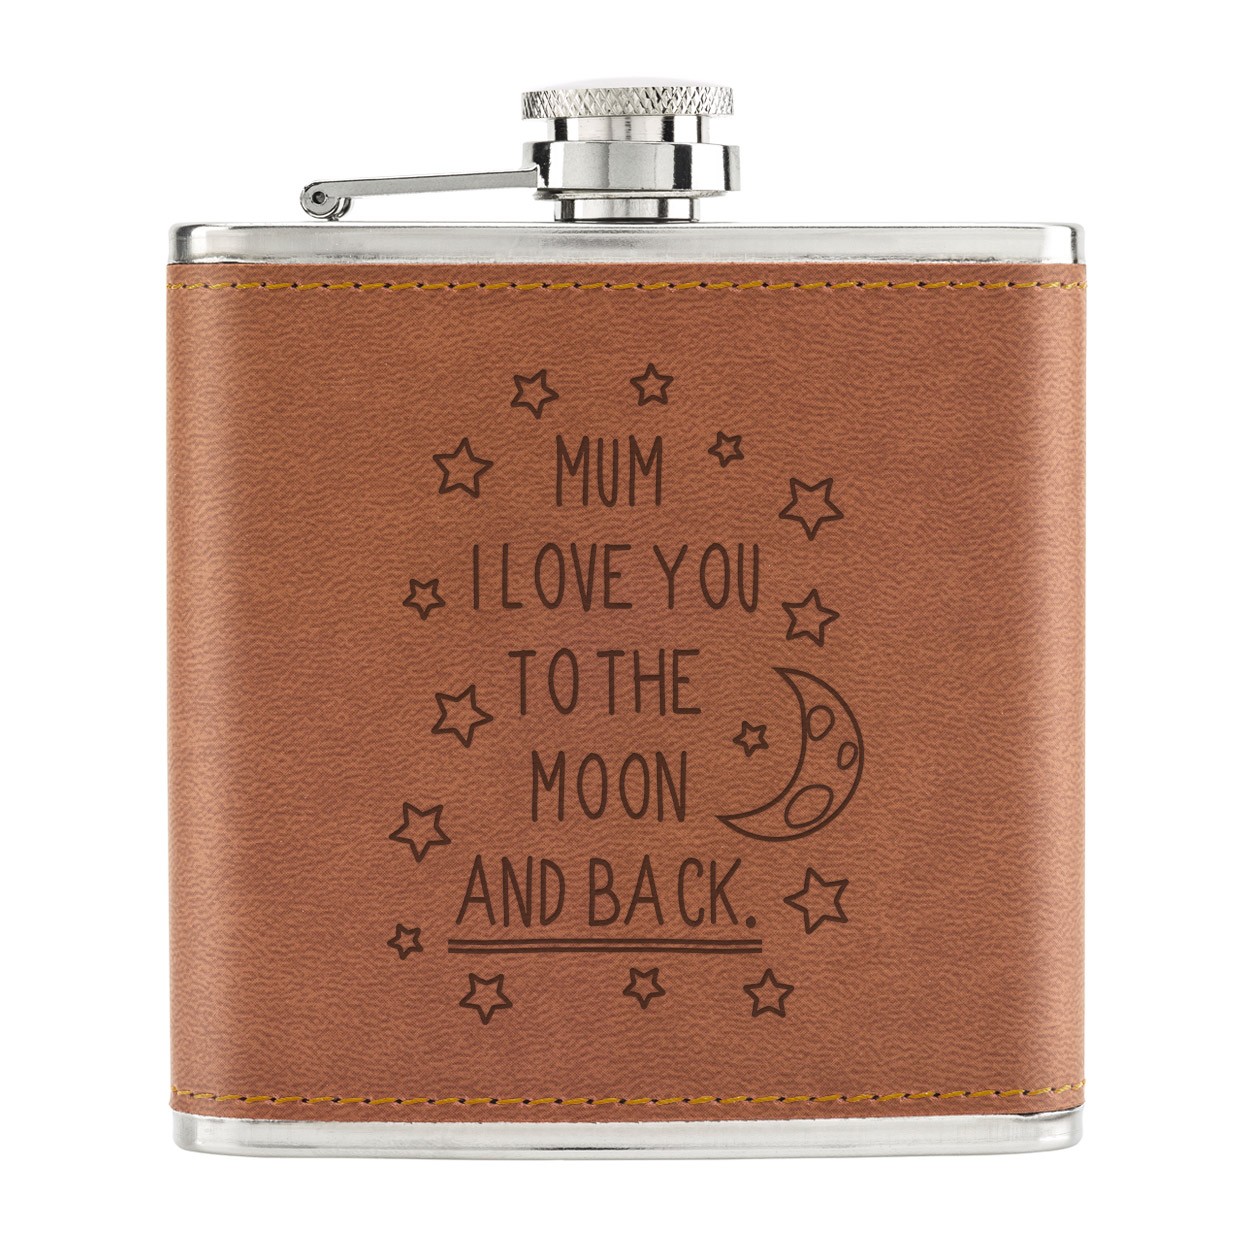 Mum I Love You To The Moon And Back 6oz PU Leather Hip Flask Tan